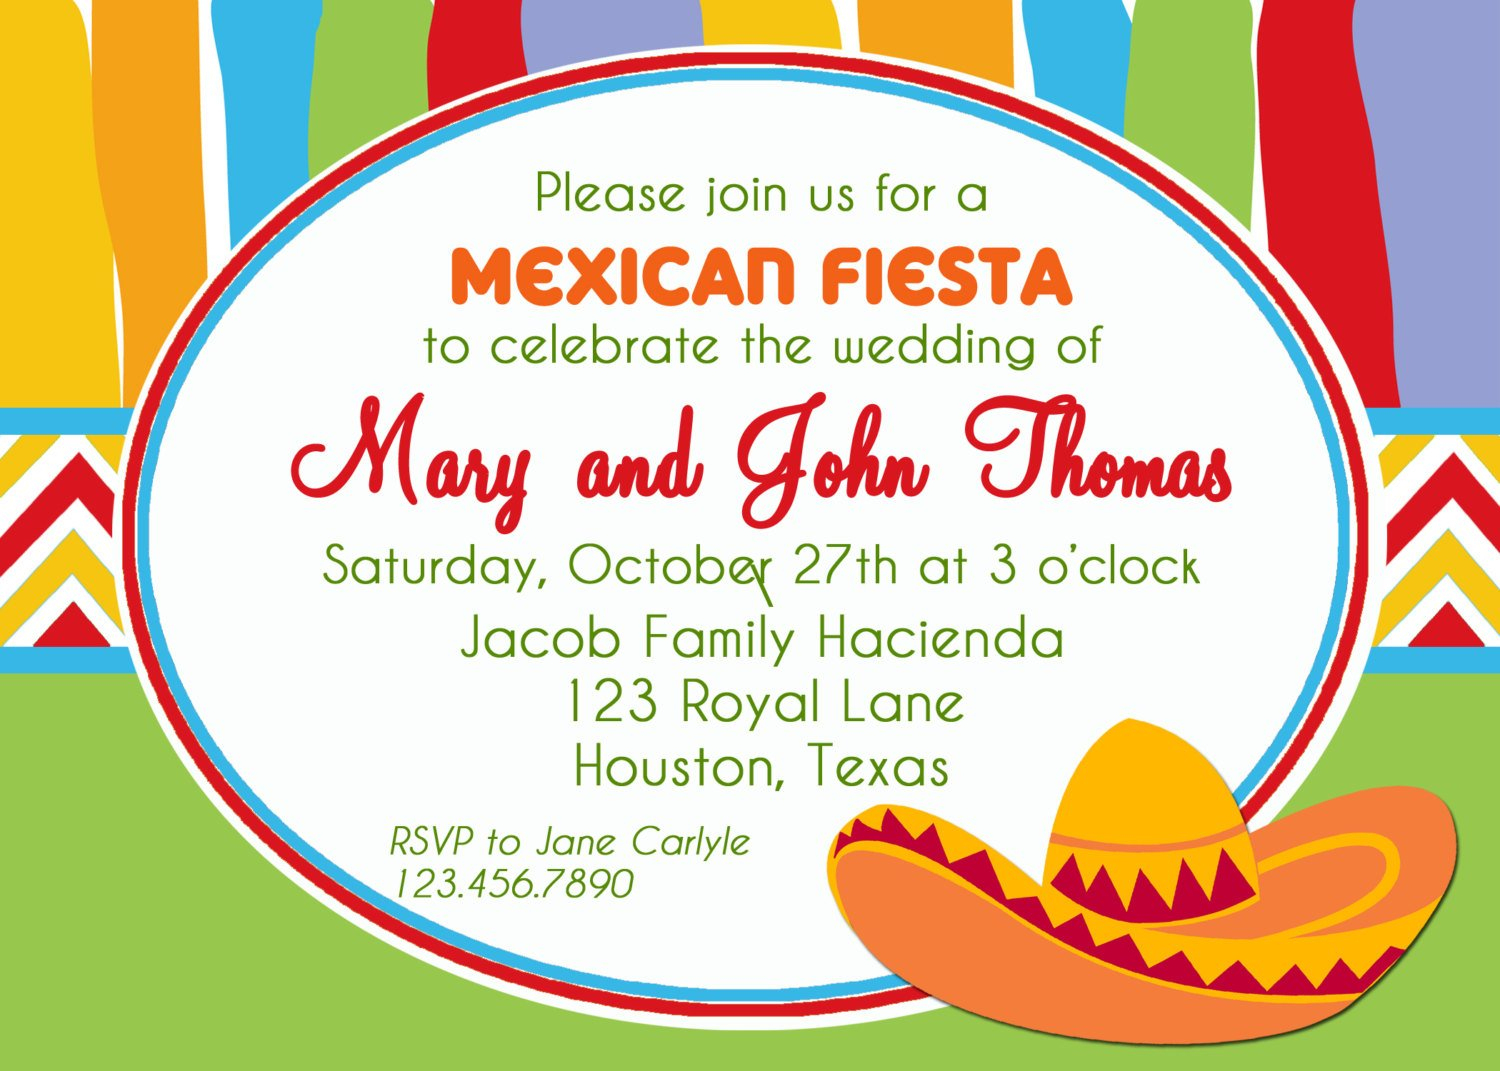 Mexican Fiesta Invitation Printable Or Printed With Free | Etsy - Free Printable Fiesta Invitations